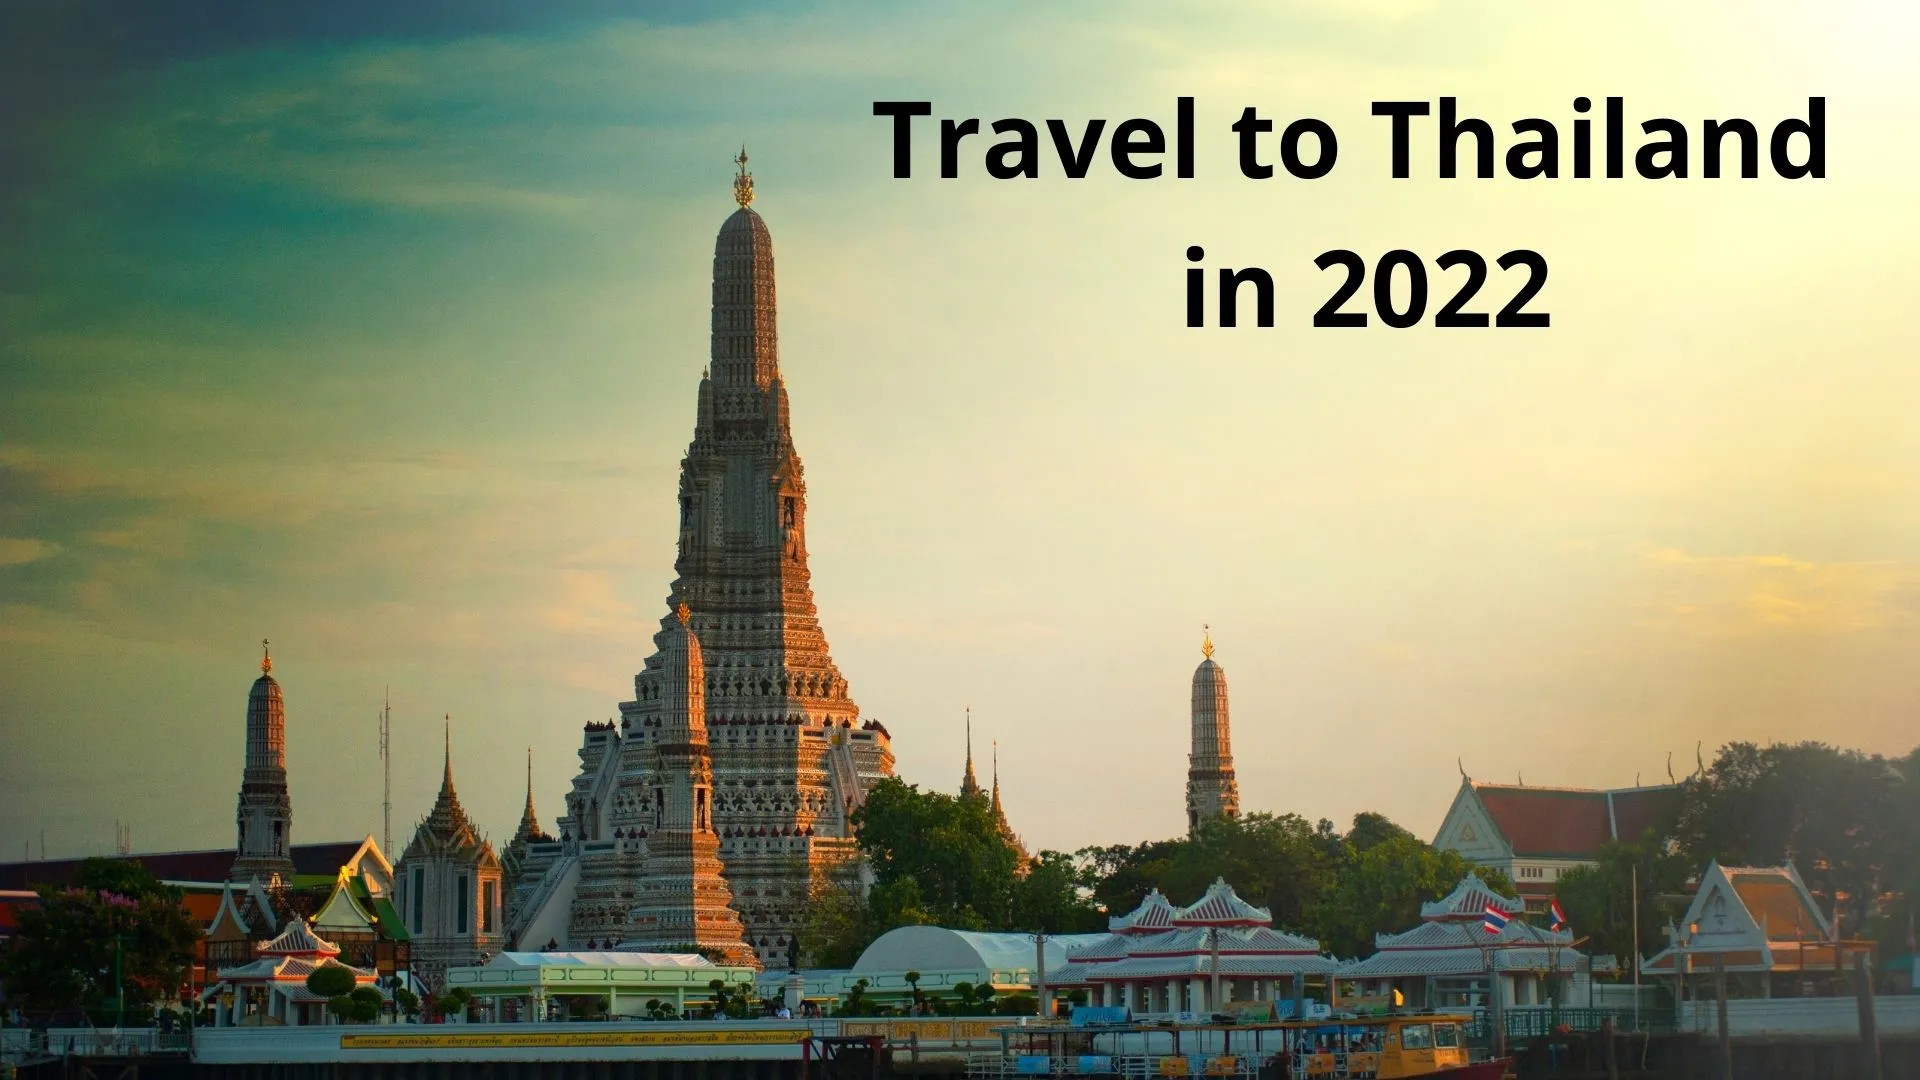 Travel to Thailand in 2022